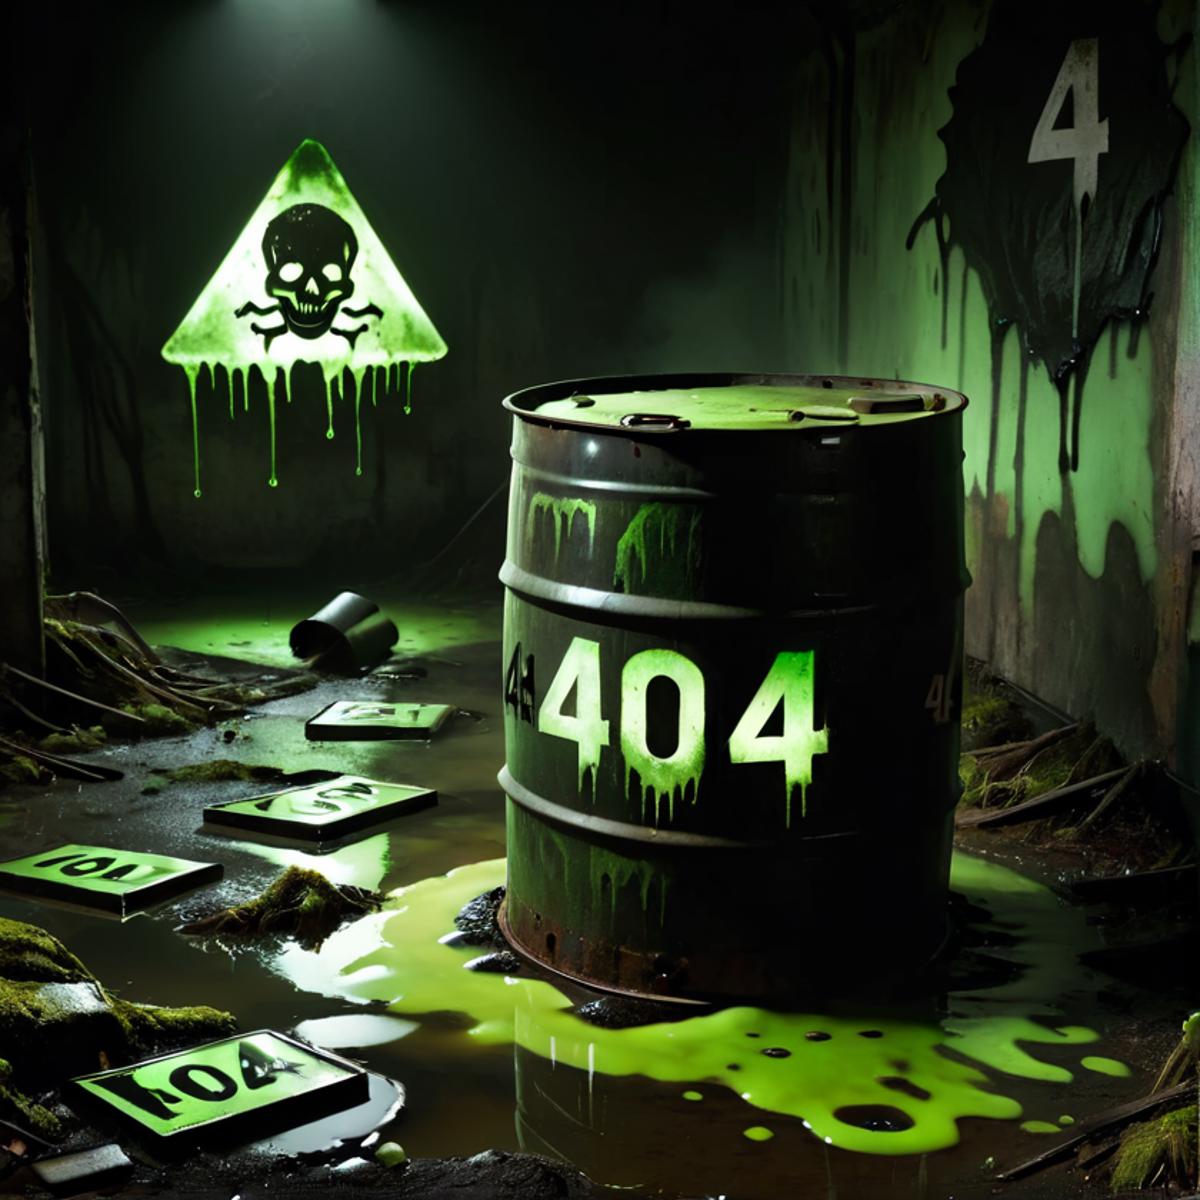 A green and brown 404 barrel in a dirty room with 404 signs around it.